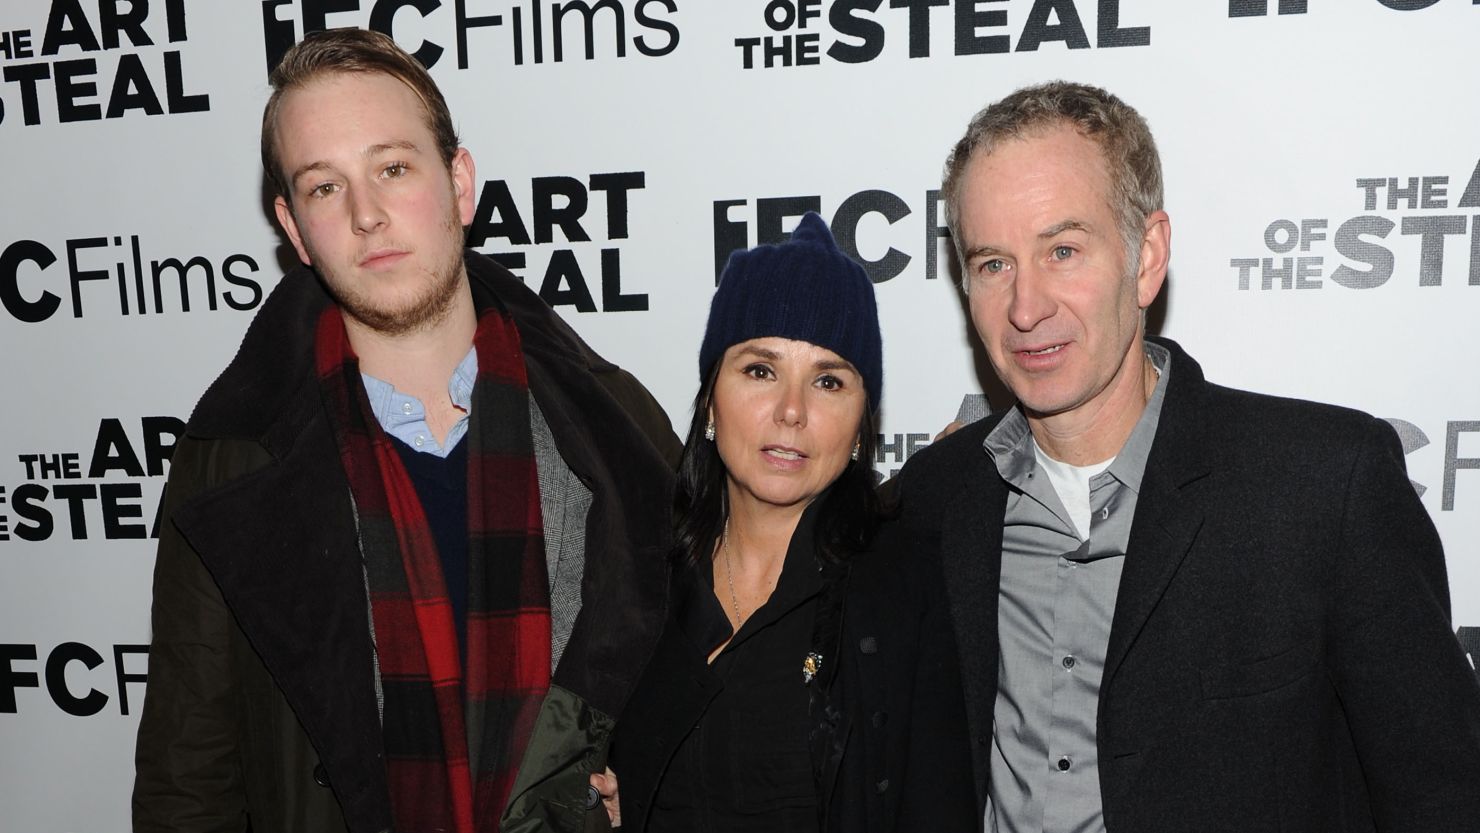 Kevin McEnroe, Patti Smyth and John McEnroe attend a premiere in February 2010 in New York City. 